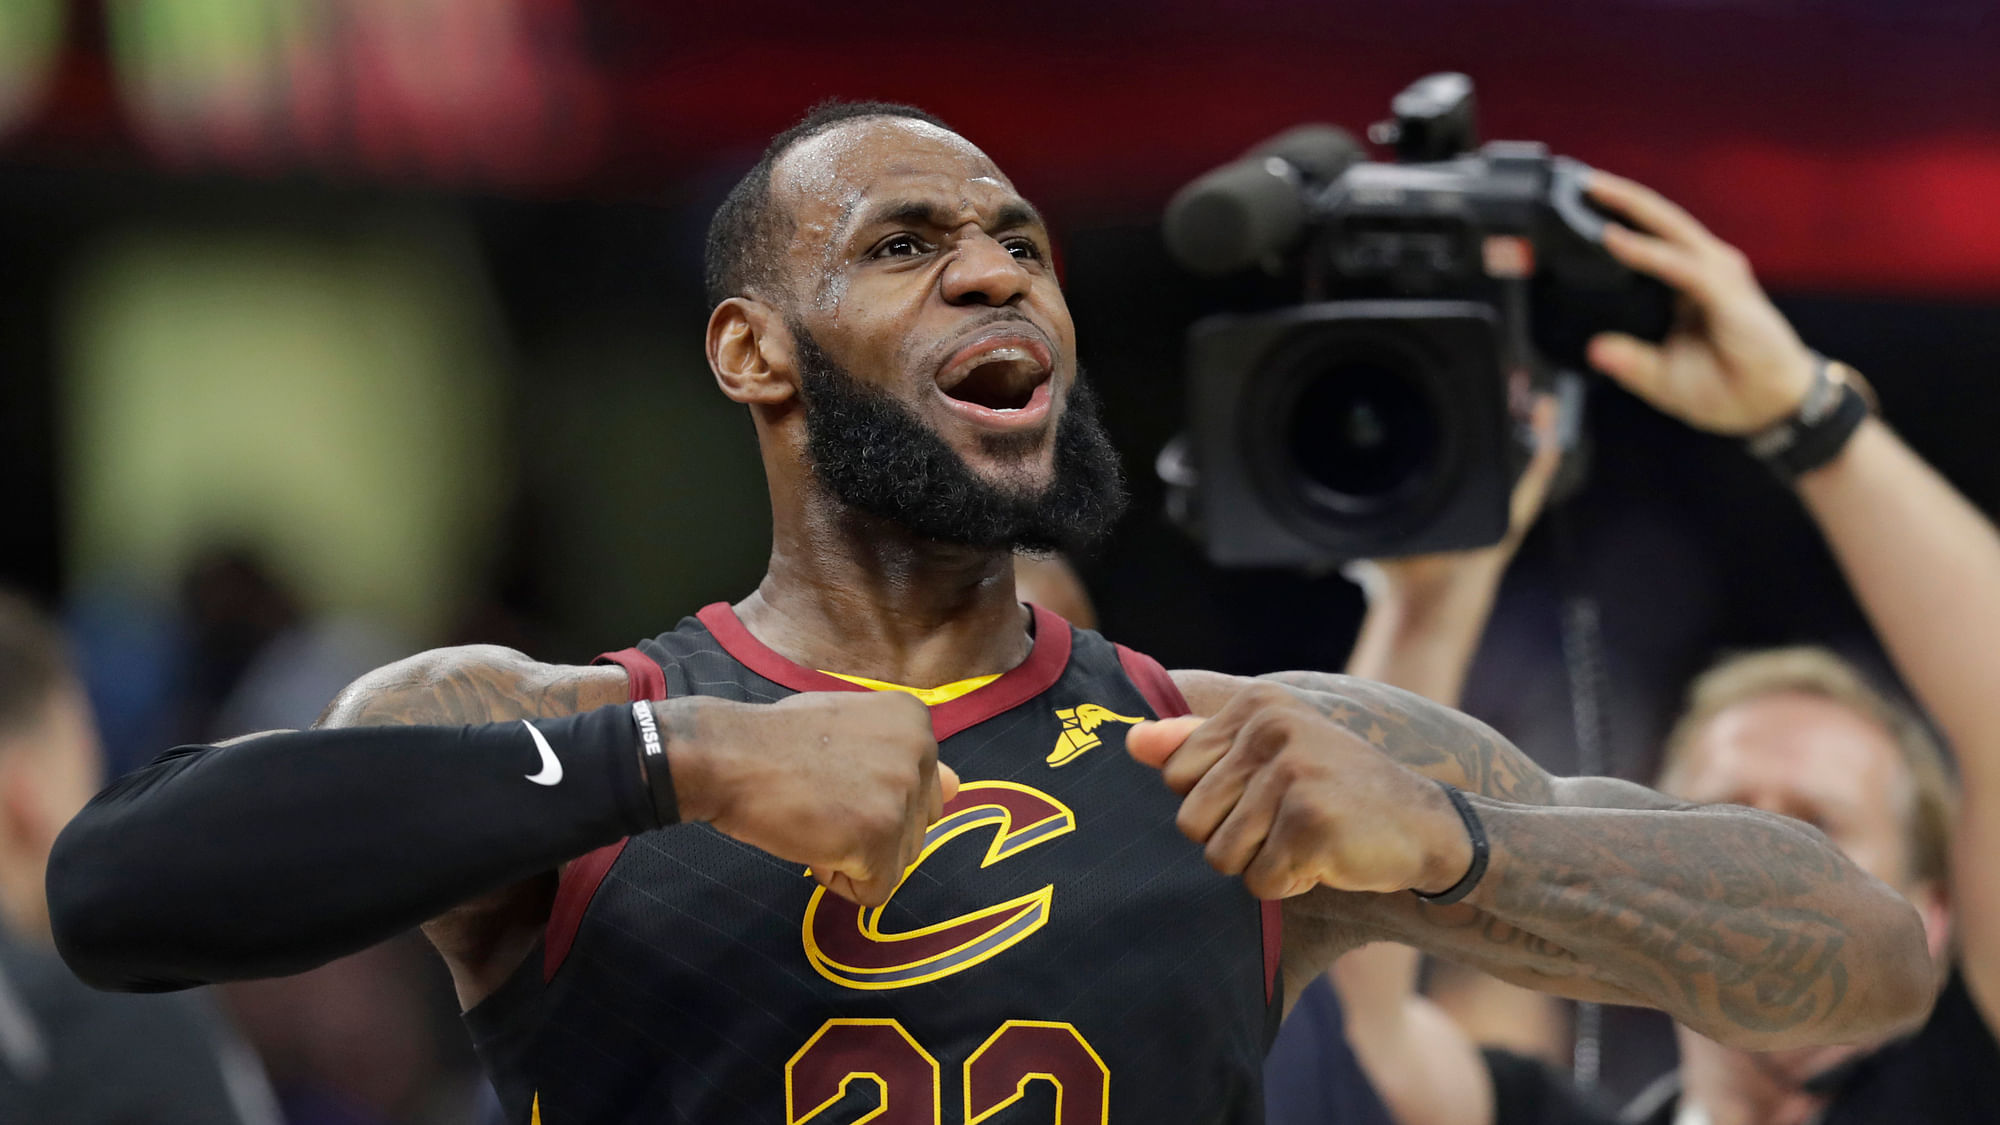 Cleveland Cavaliers’ LeBron James celebrates after scoring the game-winning shot in the second half of Game 5 of an NBA basketball first-round playoff series against the Indiana Pacers, Wednesday, April 25, 2018, in Cleveland. The Cavaliers won 98-95.&nbsp;